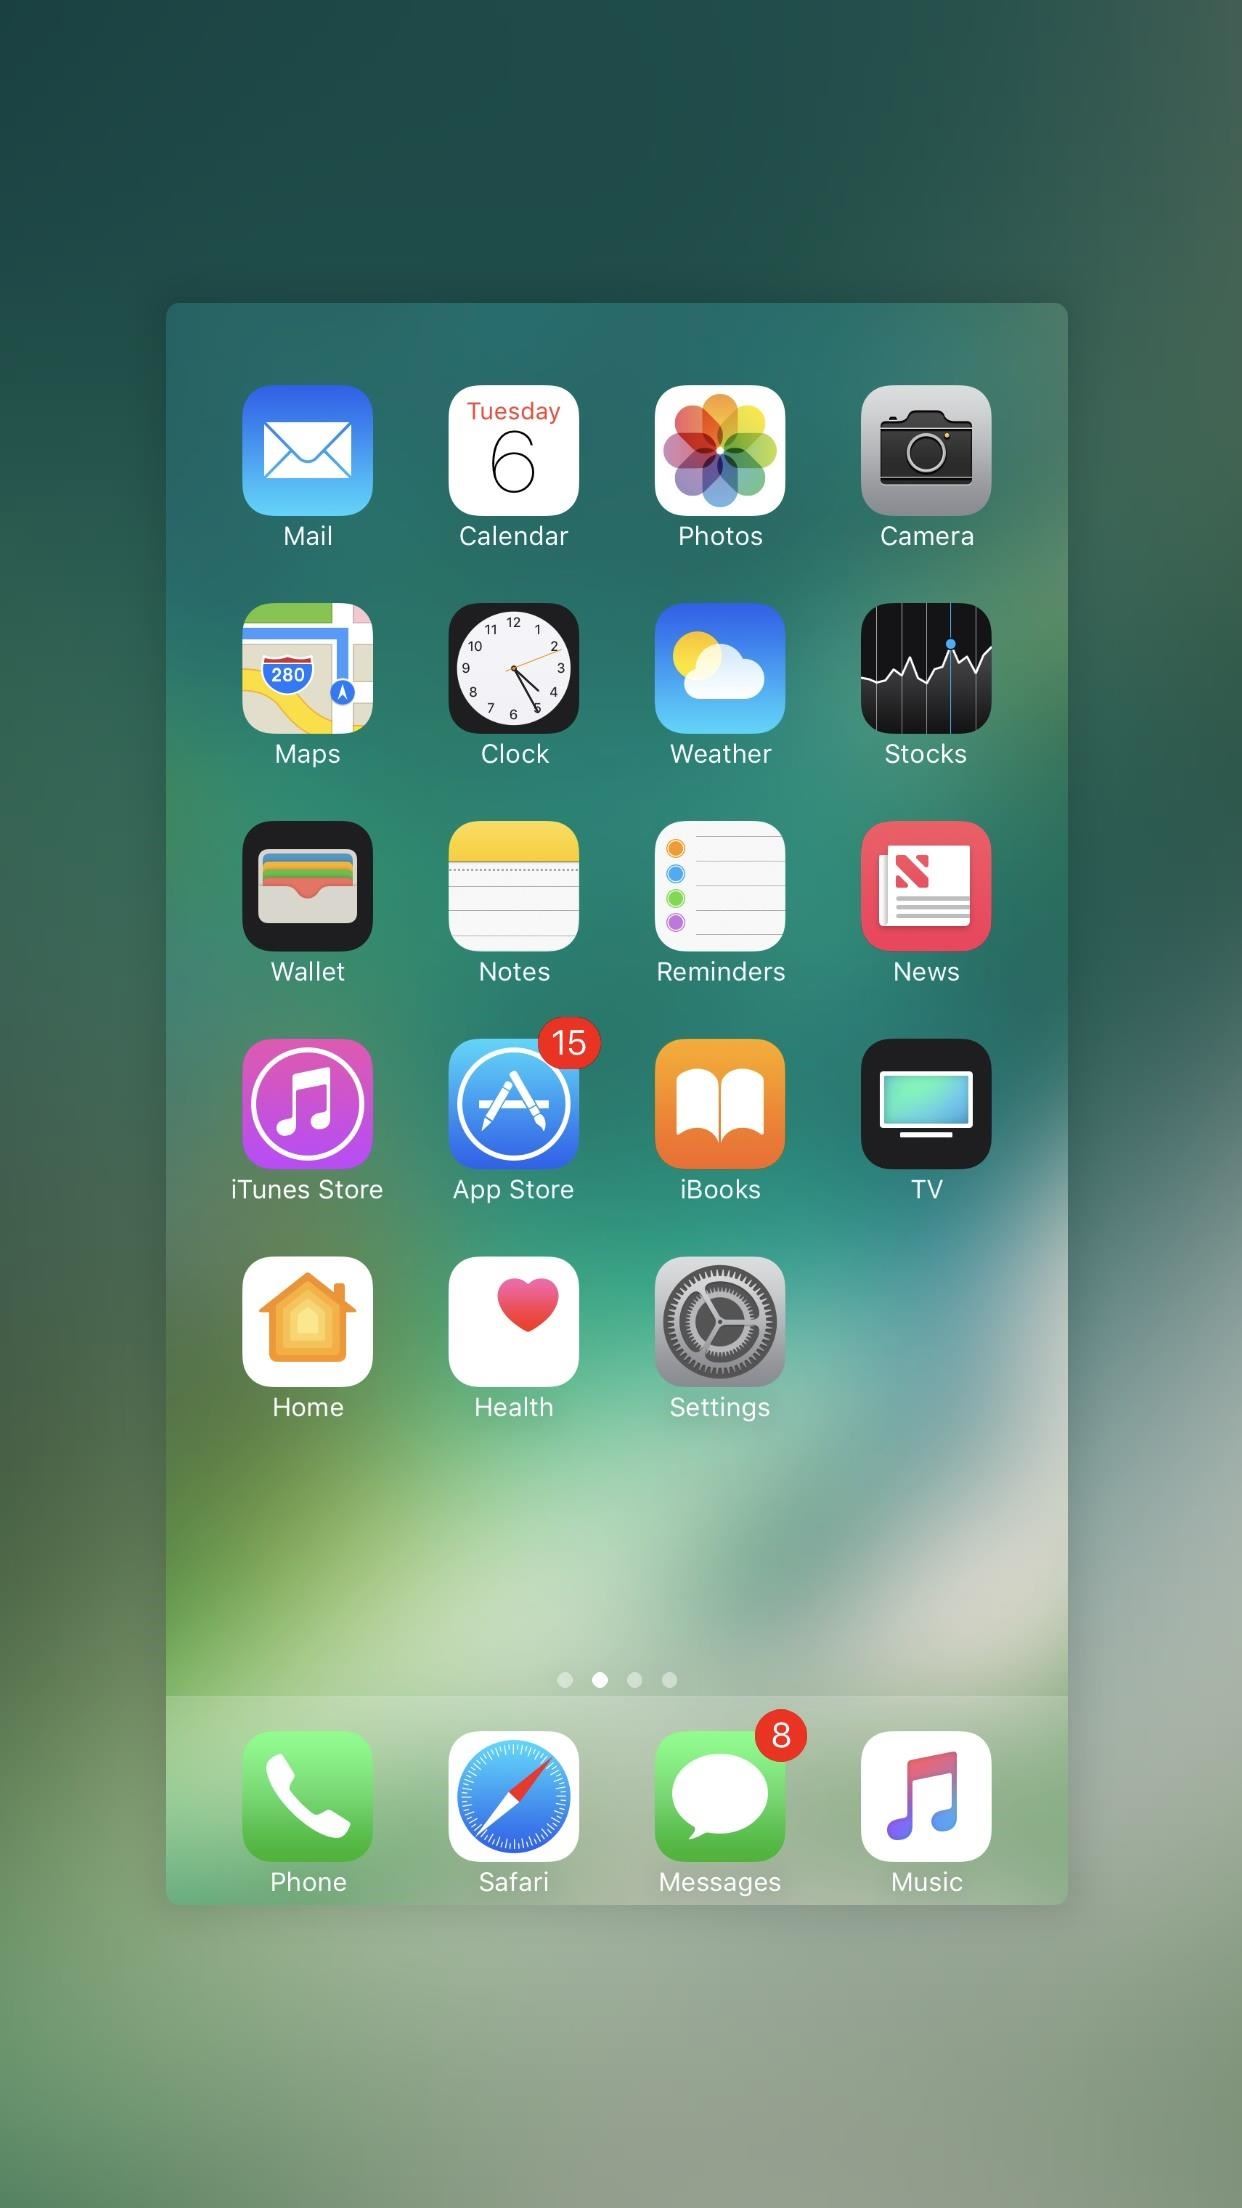 How to Force-Close All Apps at the Same Time on Your iPhone